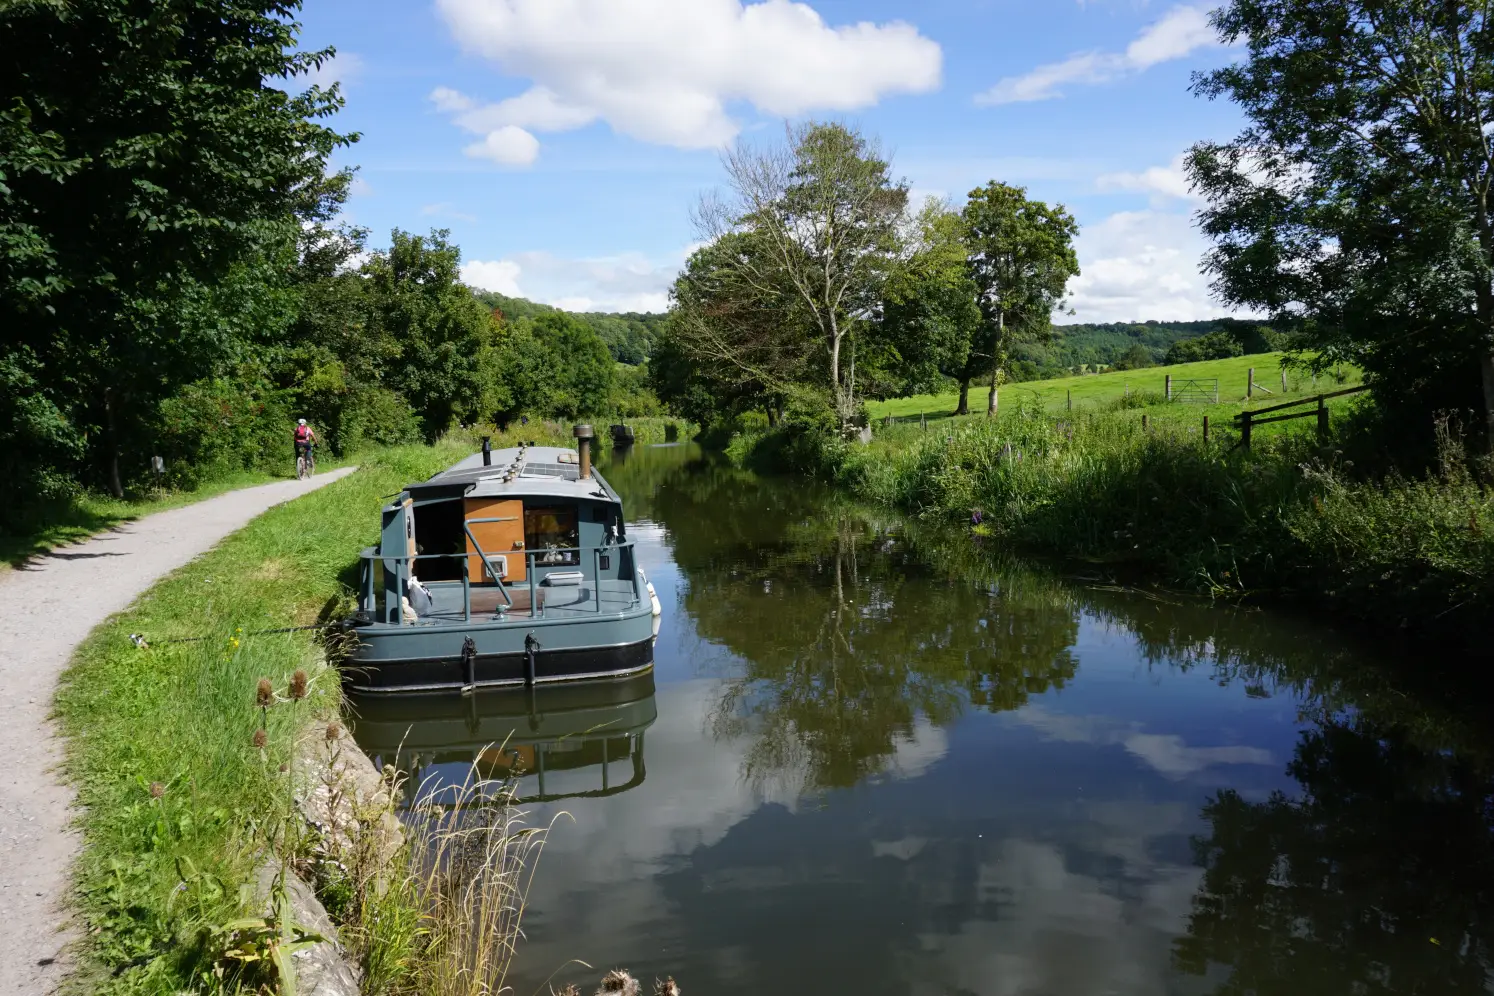 A canal boat, a canal path and the Kennet & Avon canal between Bath and Bradford-on-Avon